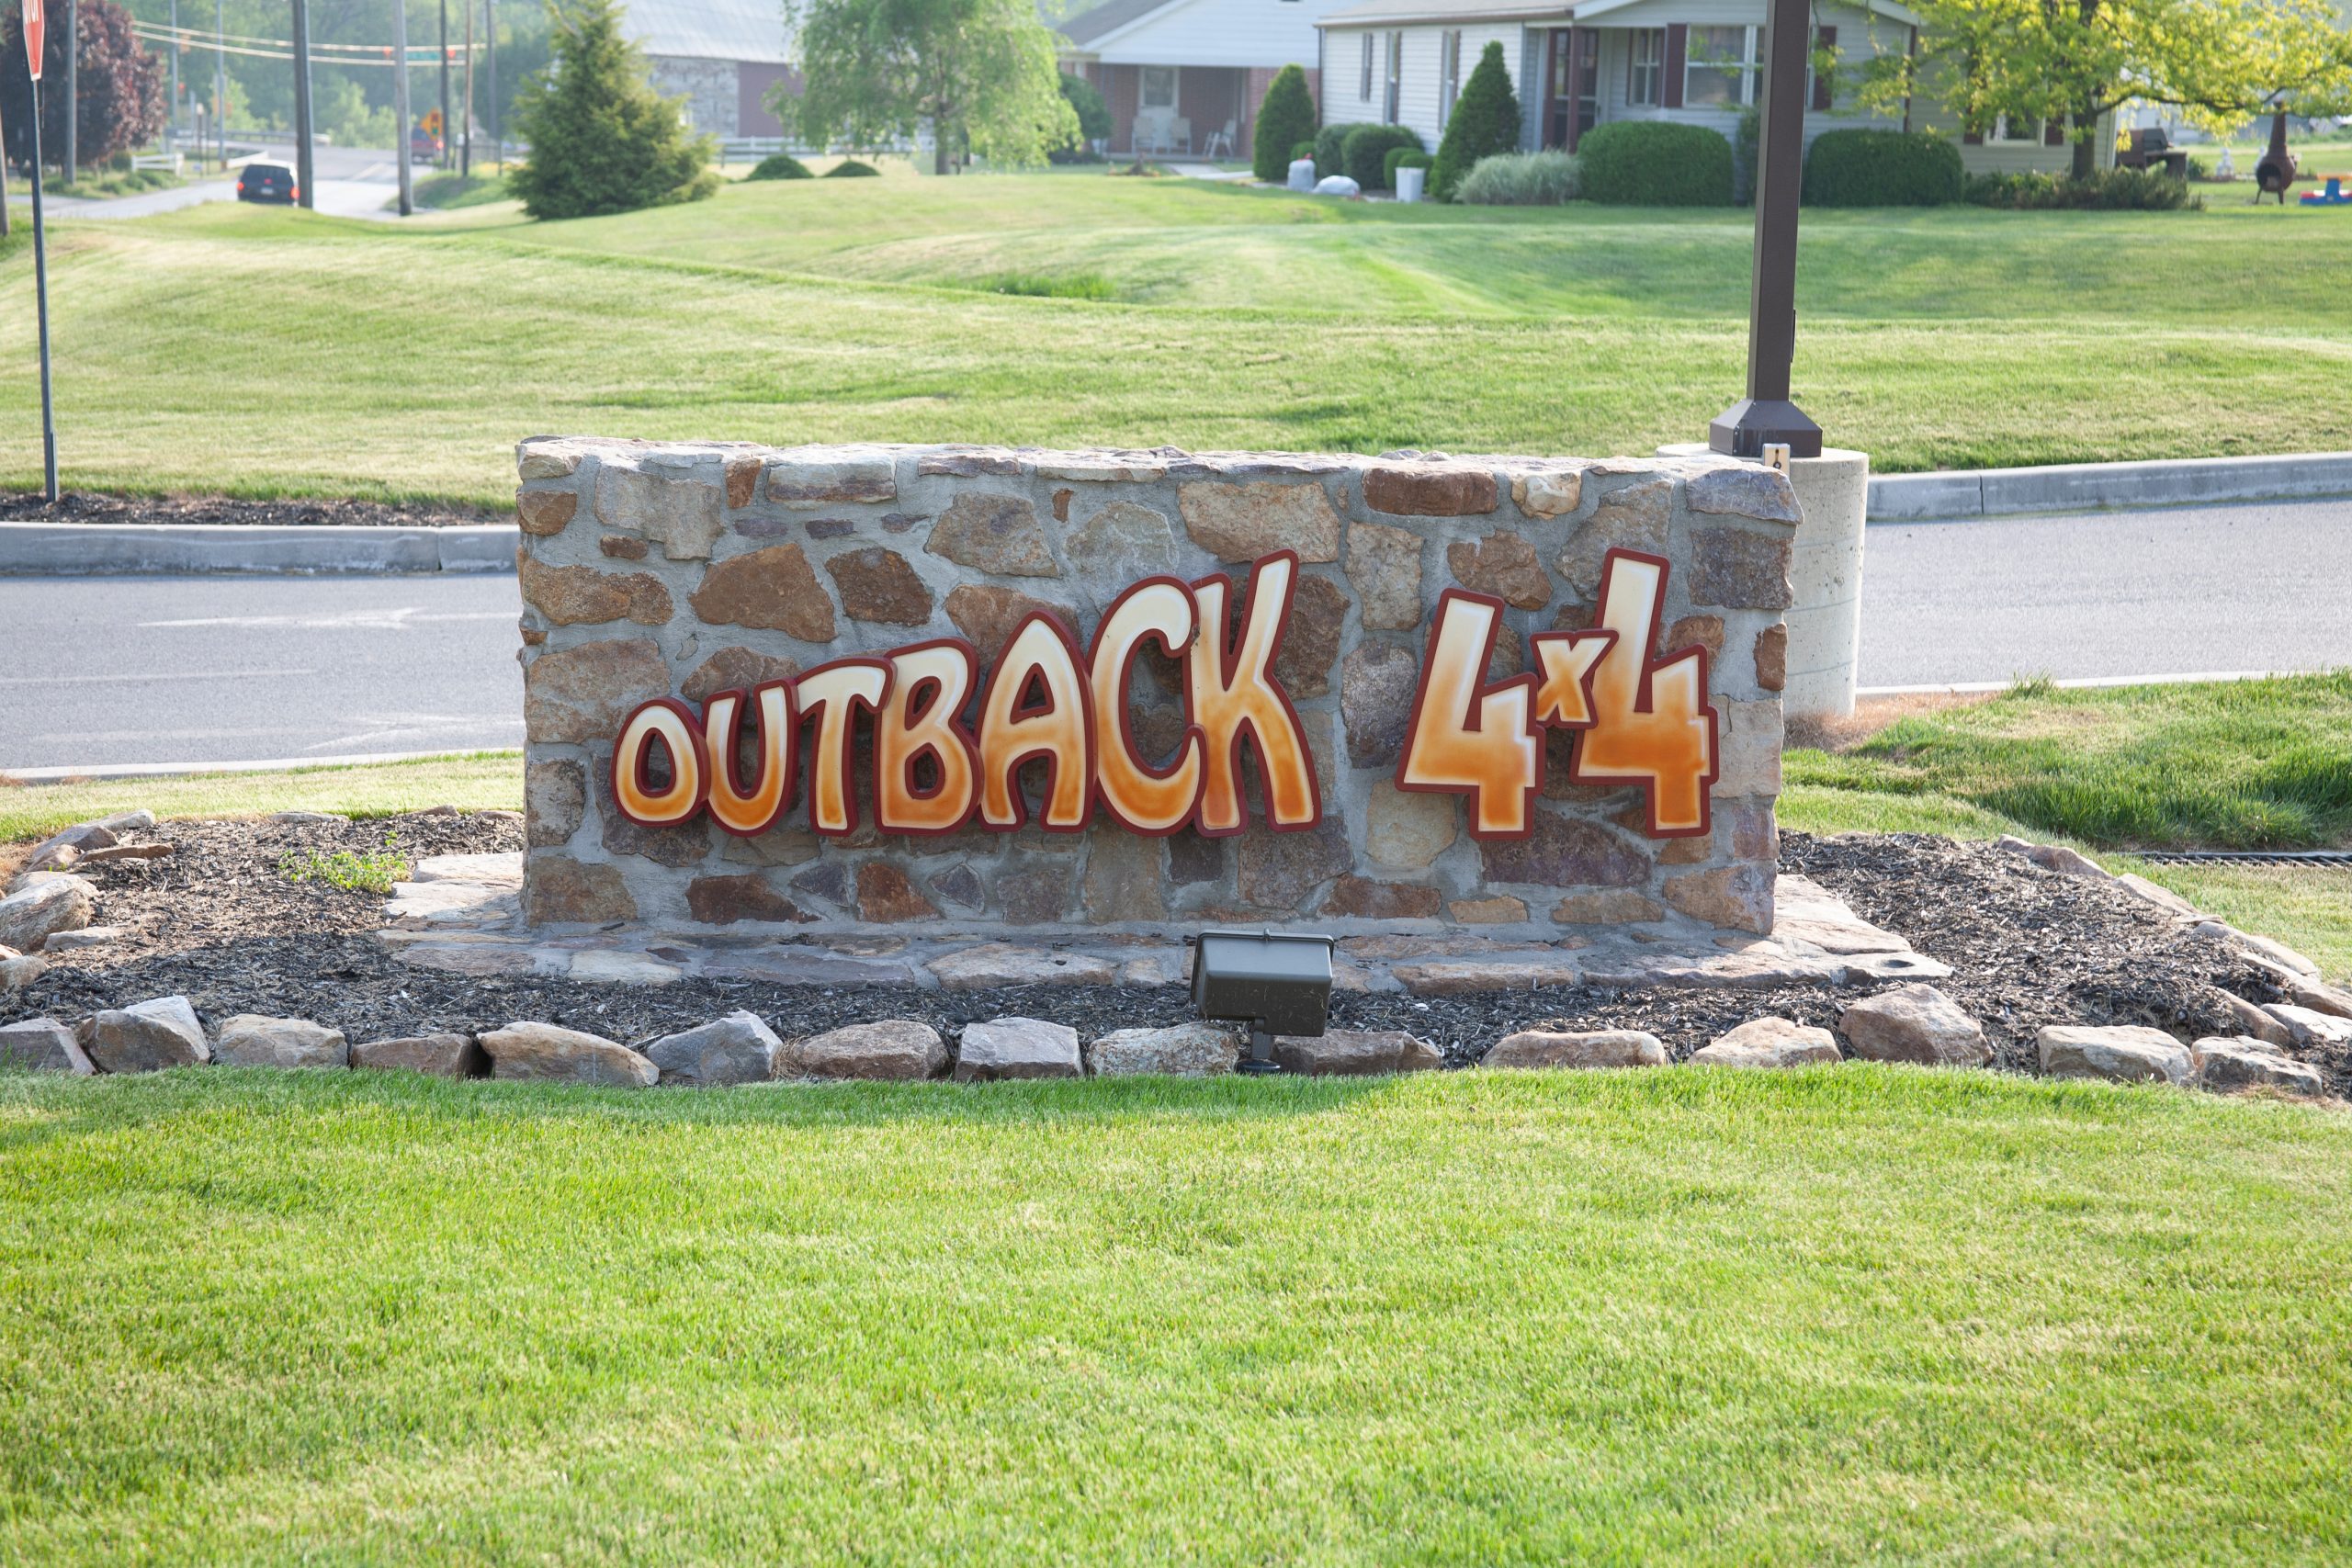 Outback-4x4-road-sign-by-business-graphics-design-company-scaled